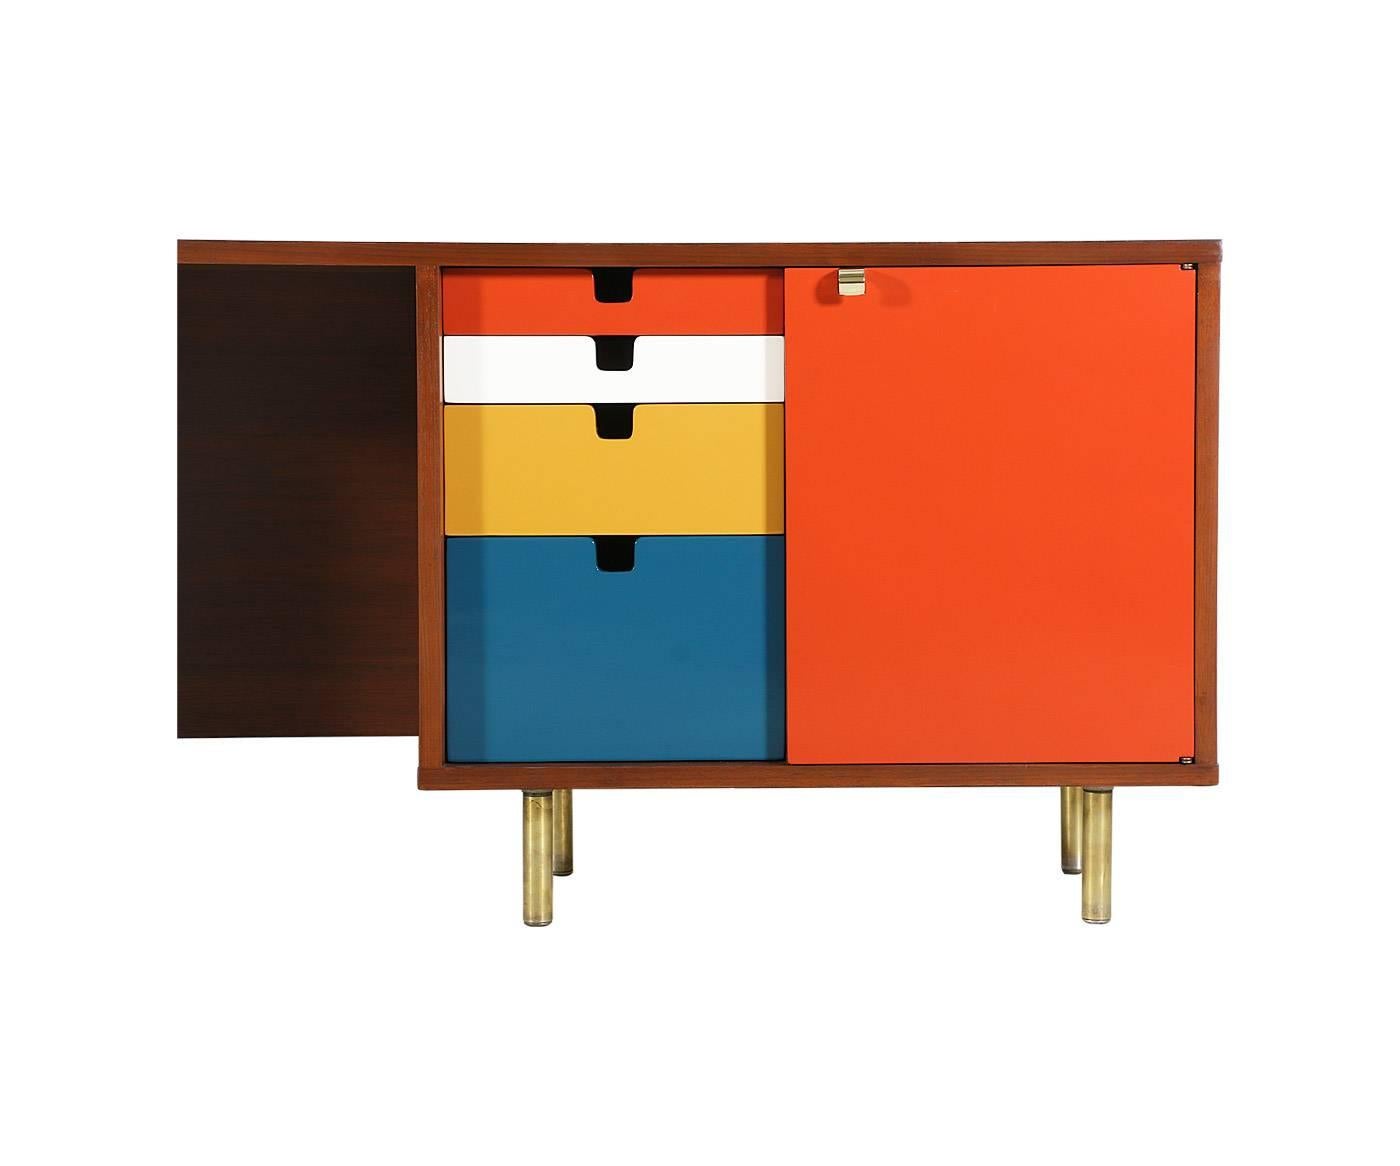 Designer: George Nelson.
Manufacturer: Herman Miller.
Period/Style: Mid-Century Modern.
Country: United States.
Date: 1950s.

Dimensions: 25.5″H x 80″L x 18.5″W.
Materials: Walnut, brass, lacquer.
Condition: Excellent, newly